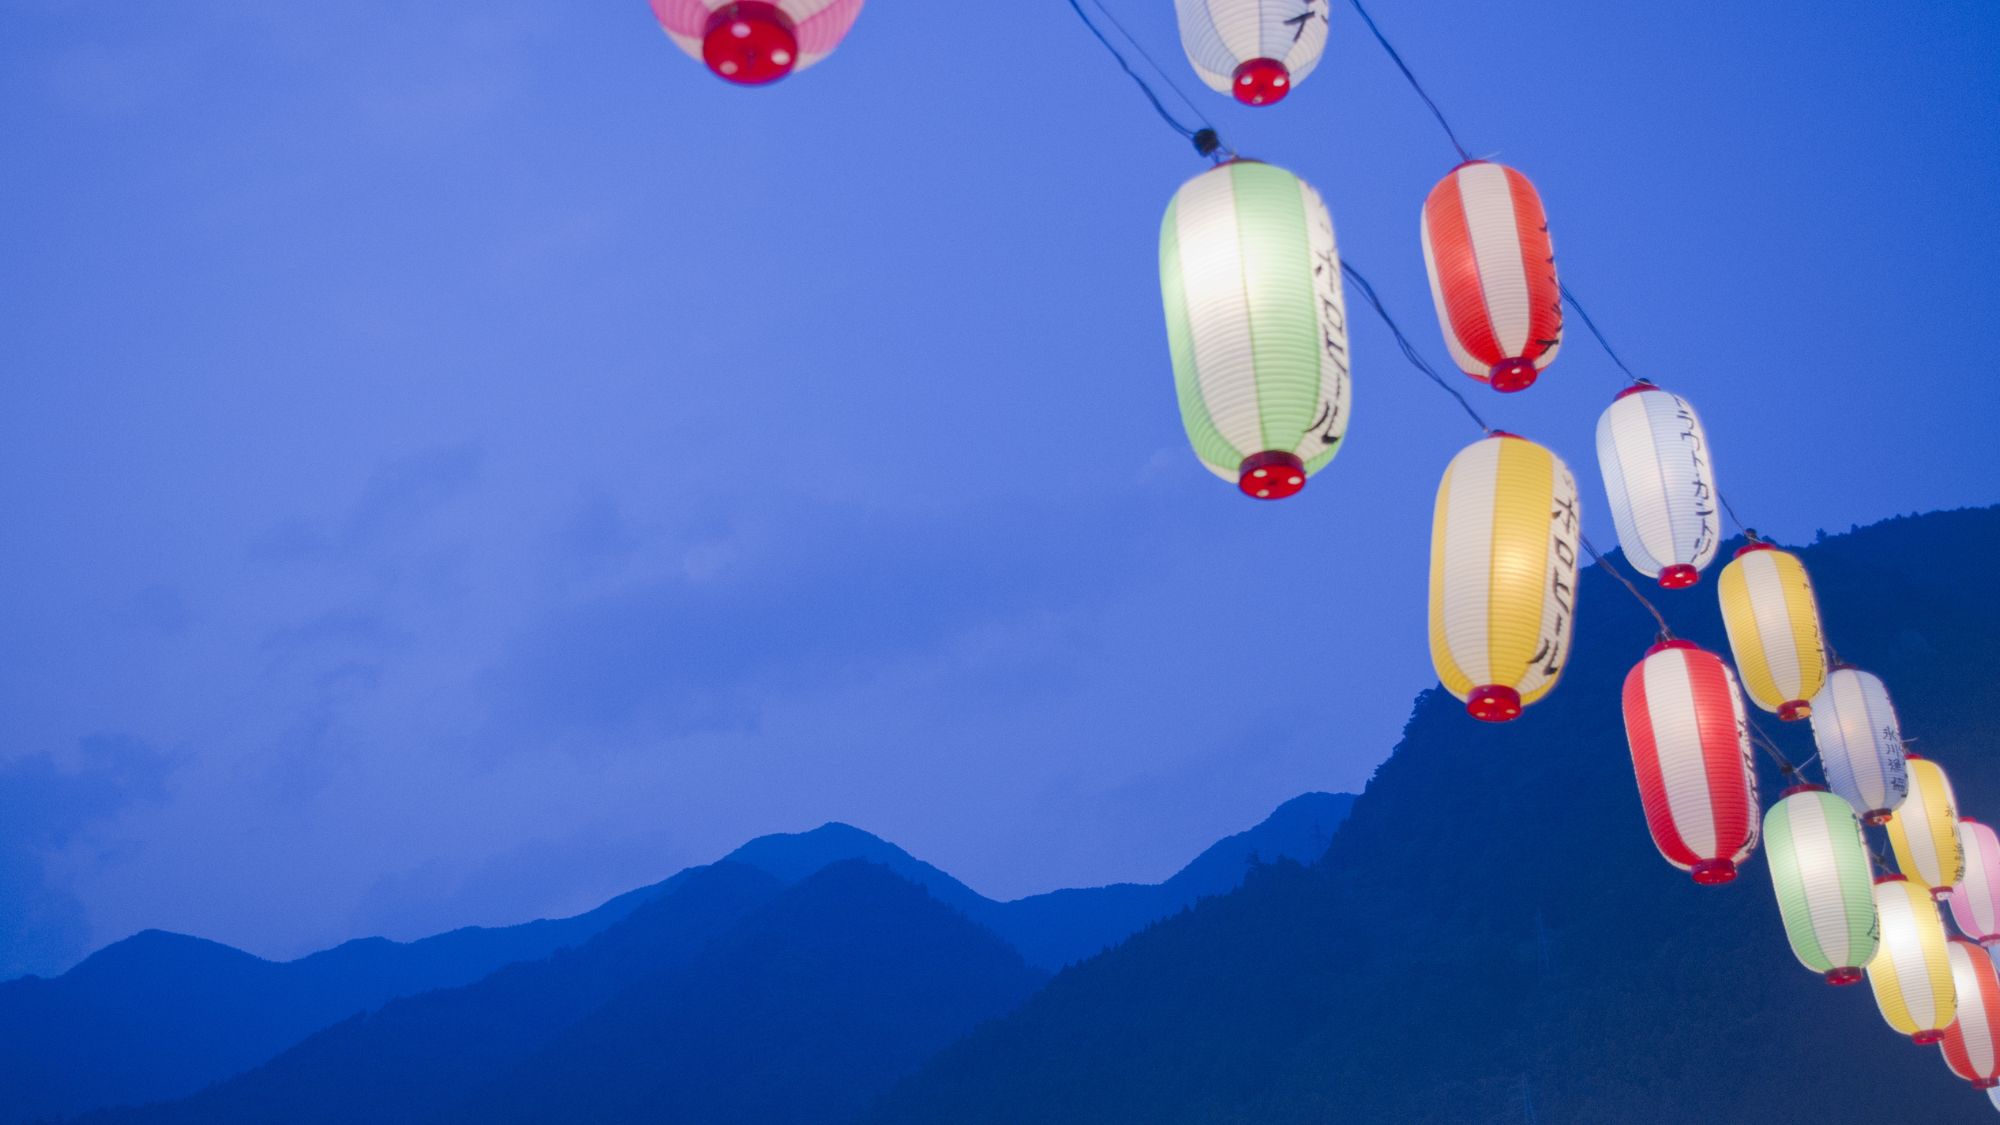 Japanese lanterns in front of a mountain range at twilight.